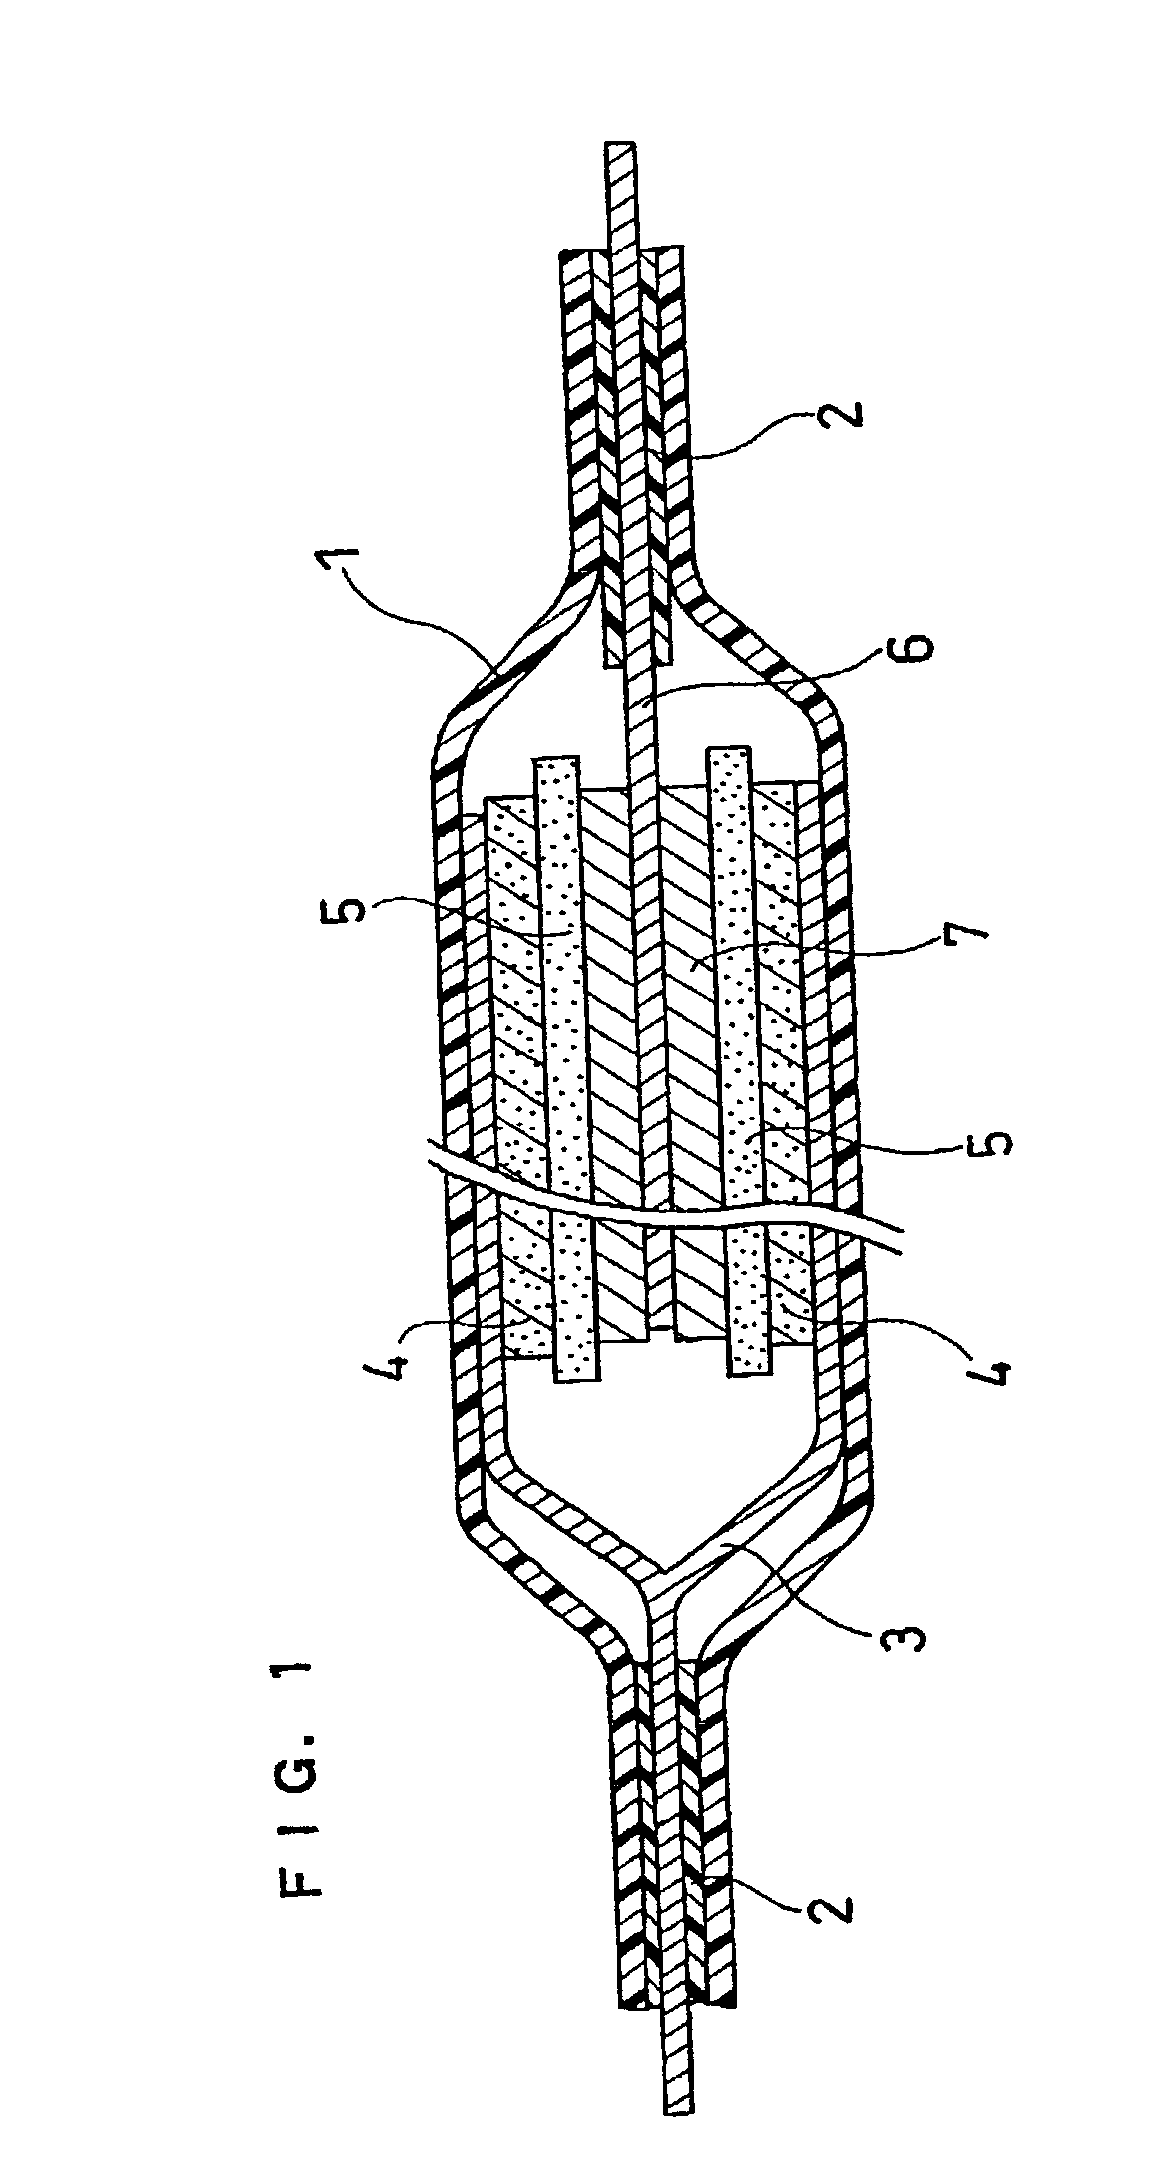 Lithium polymer secondary cell